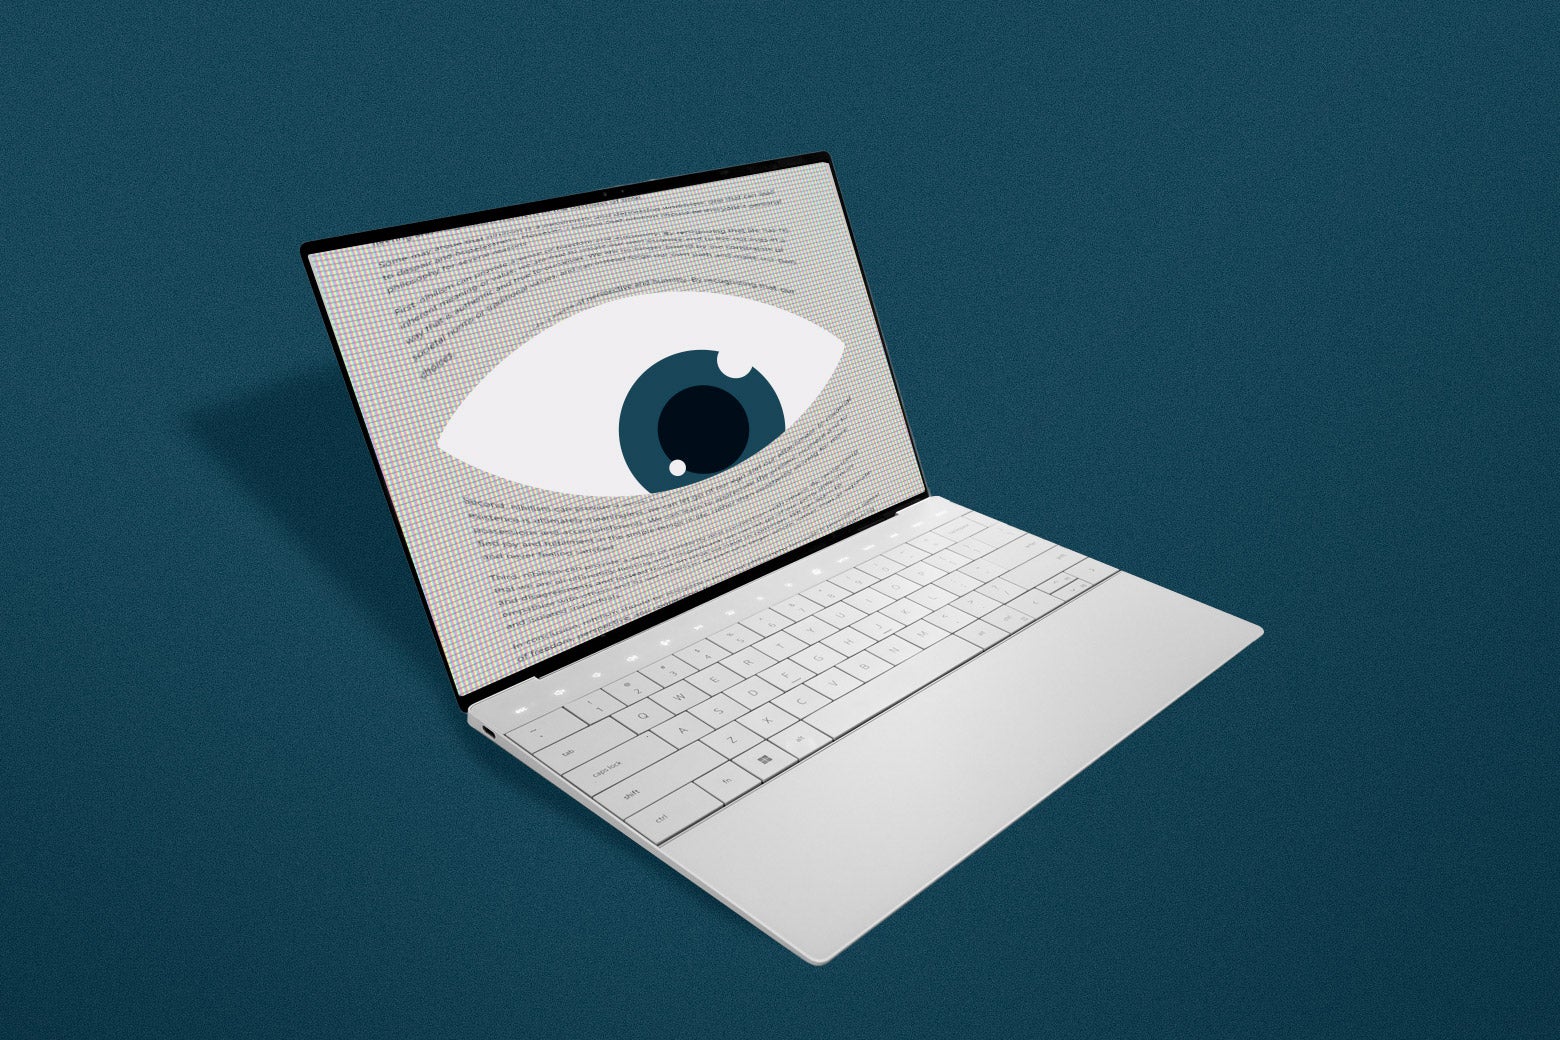 An all-seeing eye surveils your every action from the screen of an open white laptop.